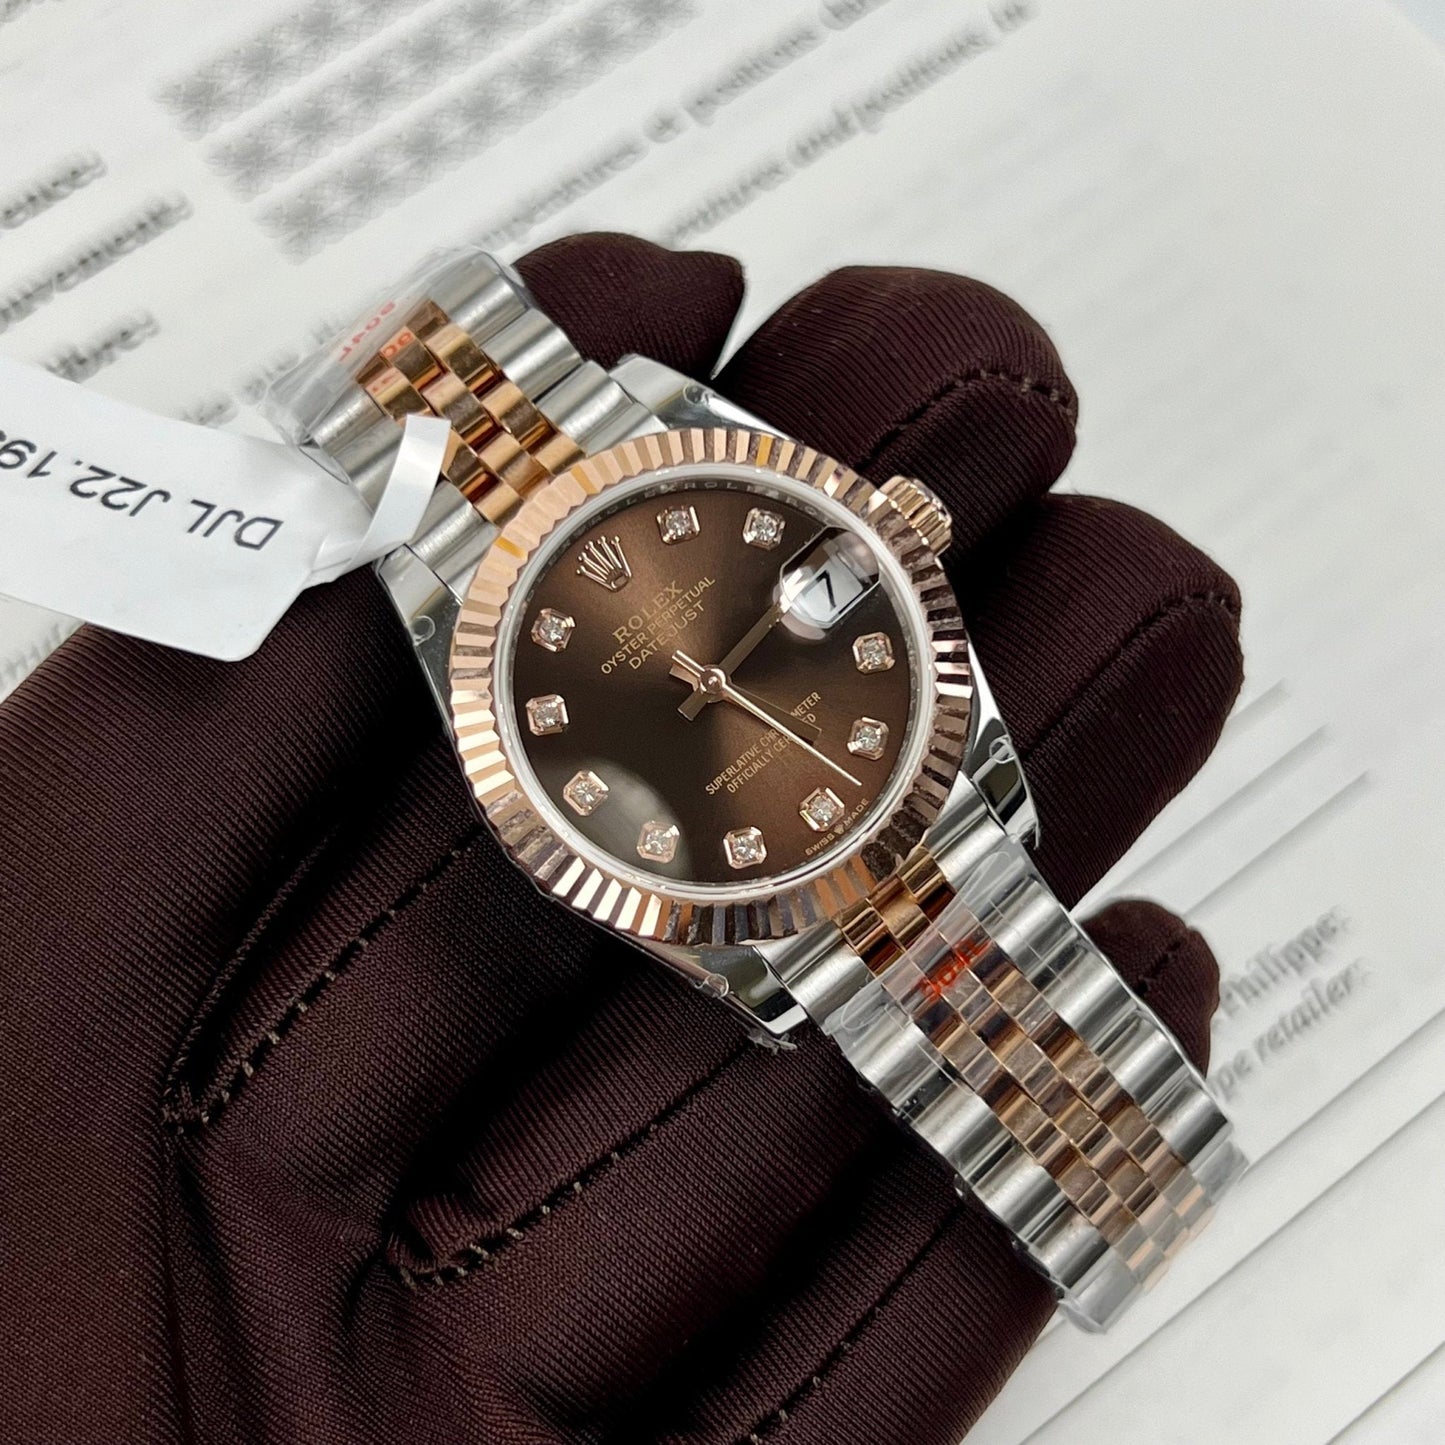 Rolex Lady Datejust 279171 31mm Chocolate dial and diamond